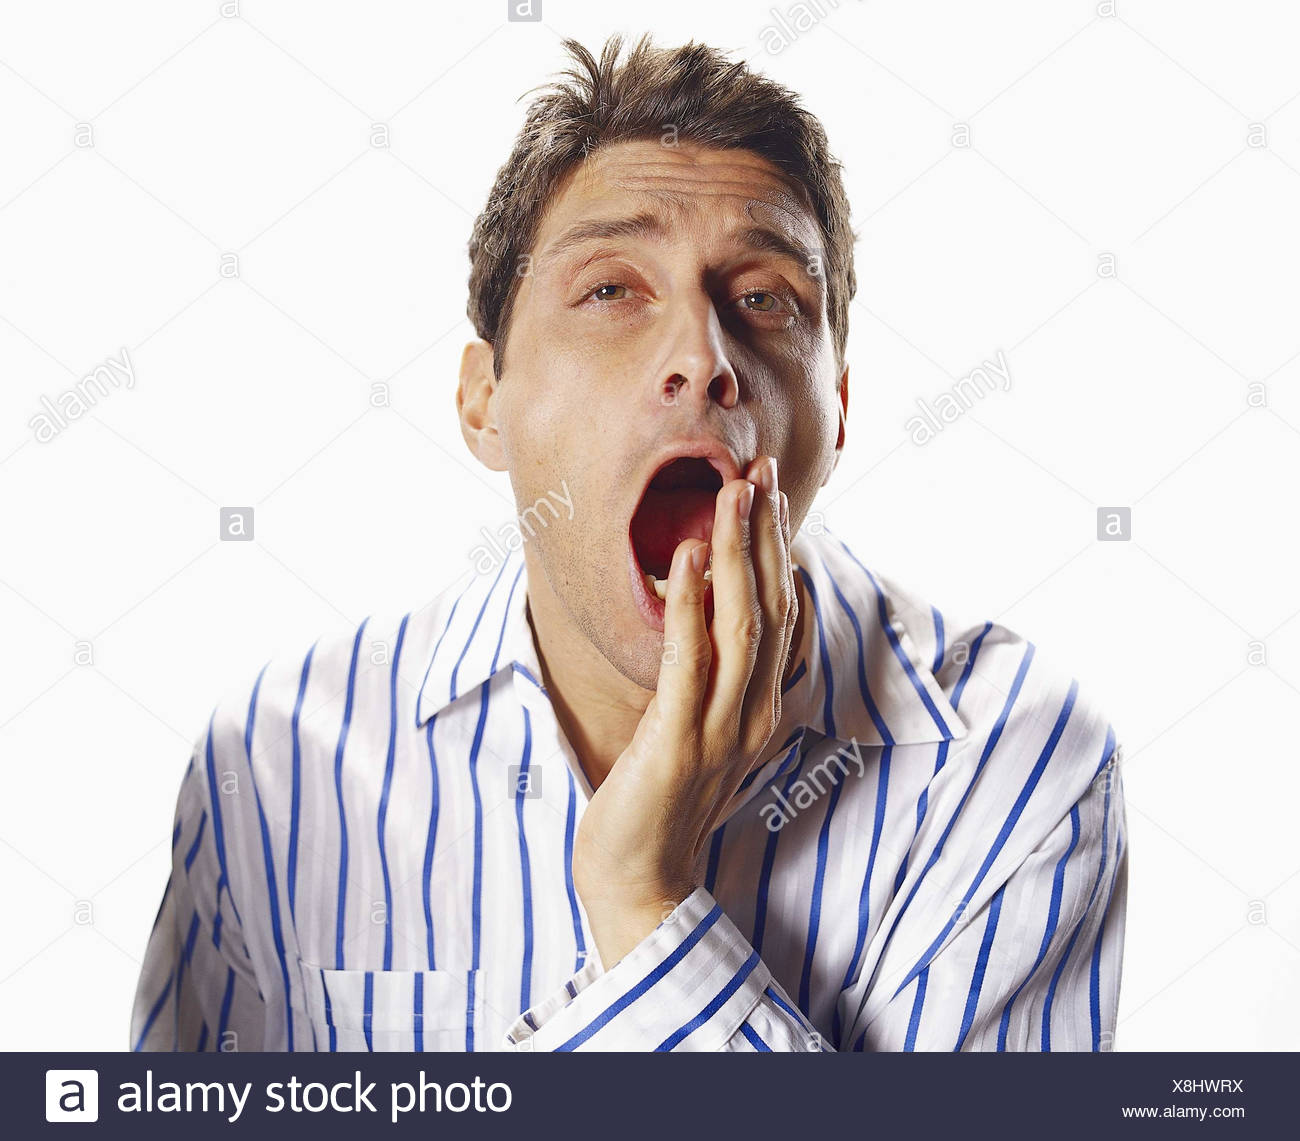 Man Yawning Photos and Premium High Res Pictures - Getty 